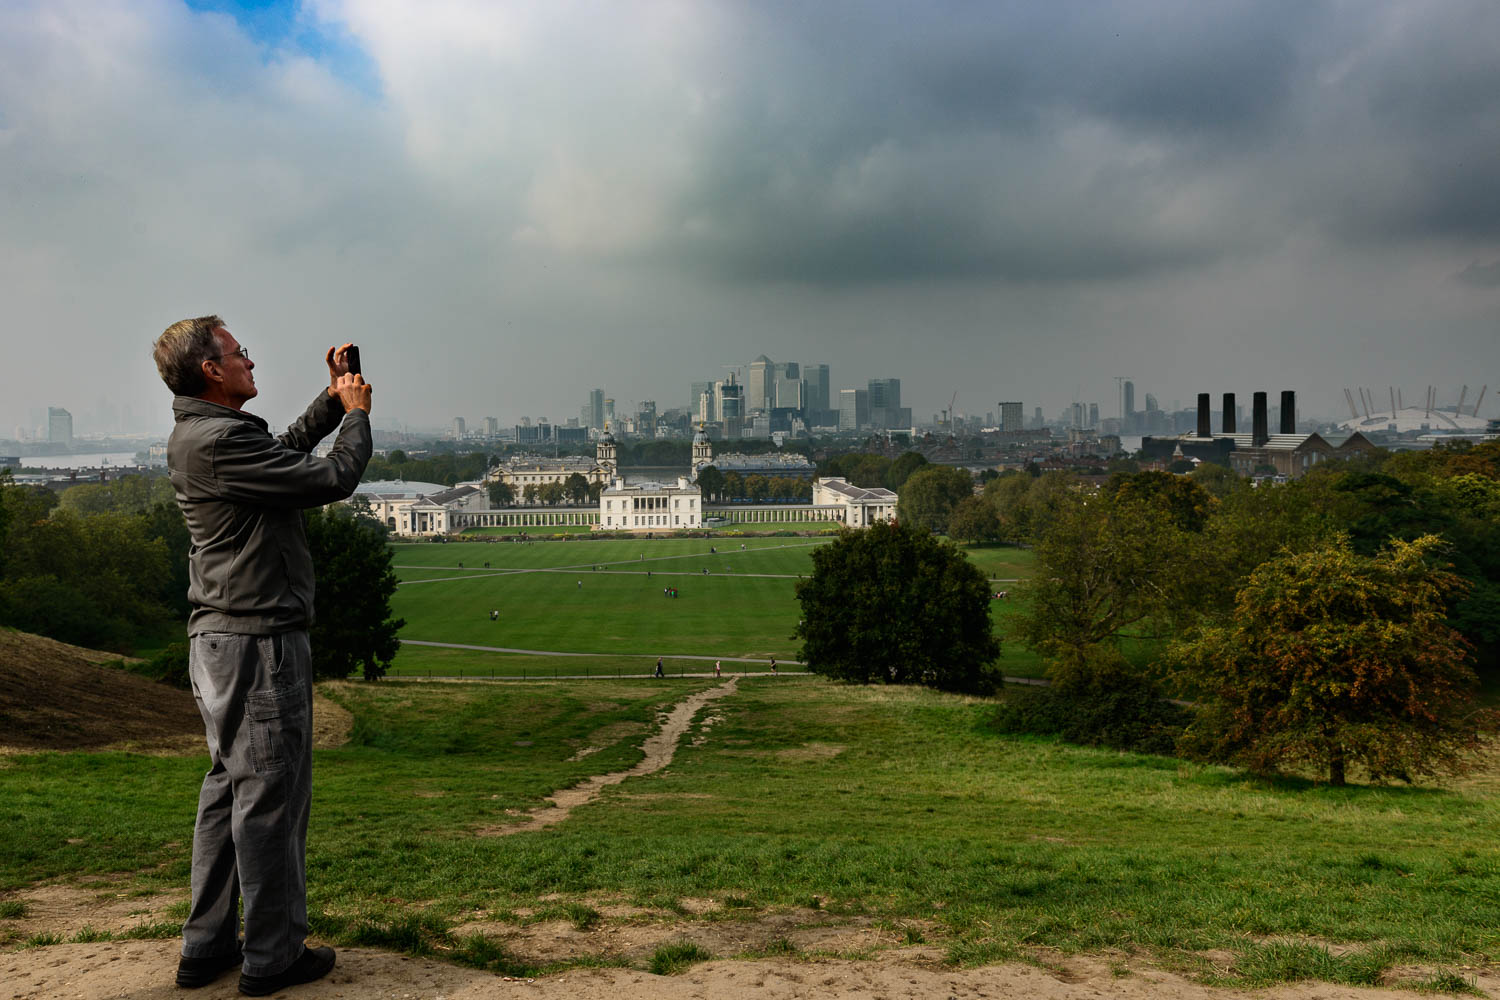 Idiot with iPhone far more important than 100 peopel behind the barriier taking their pictures at Greenwich Observatory